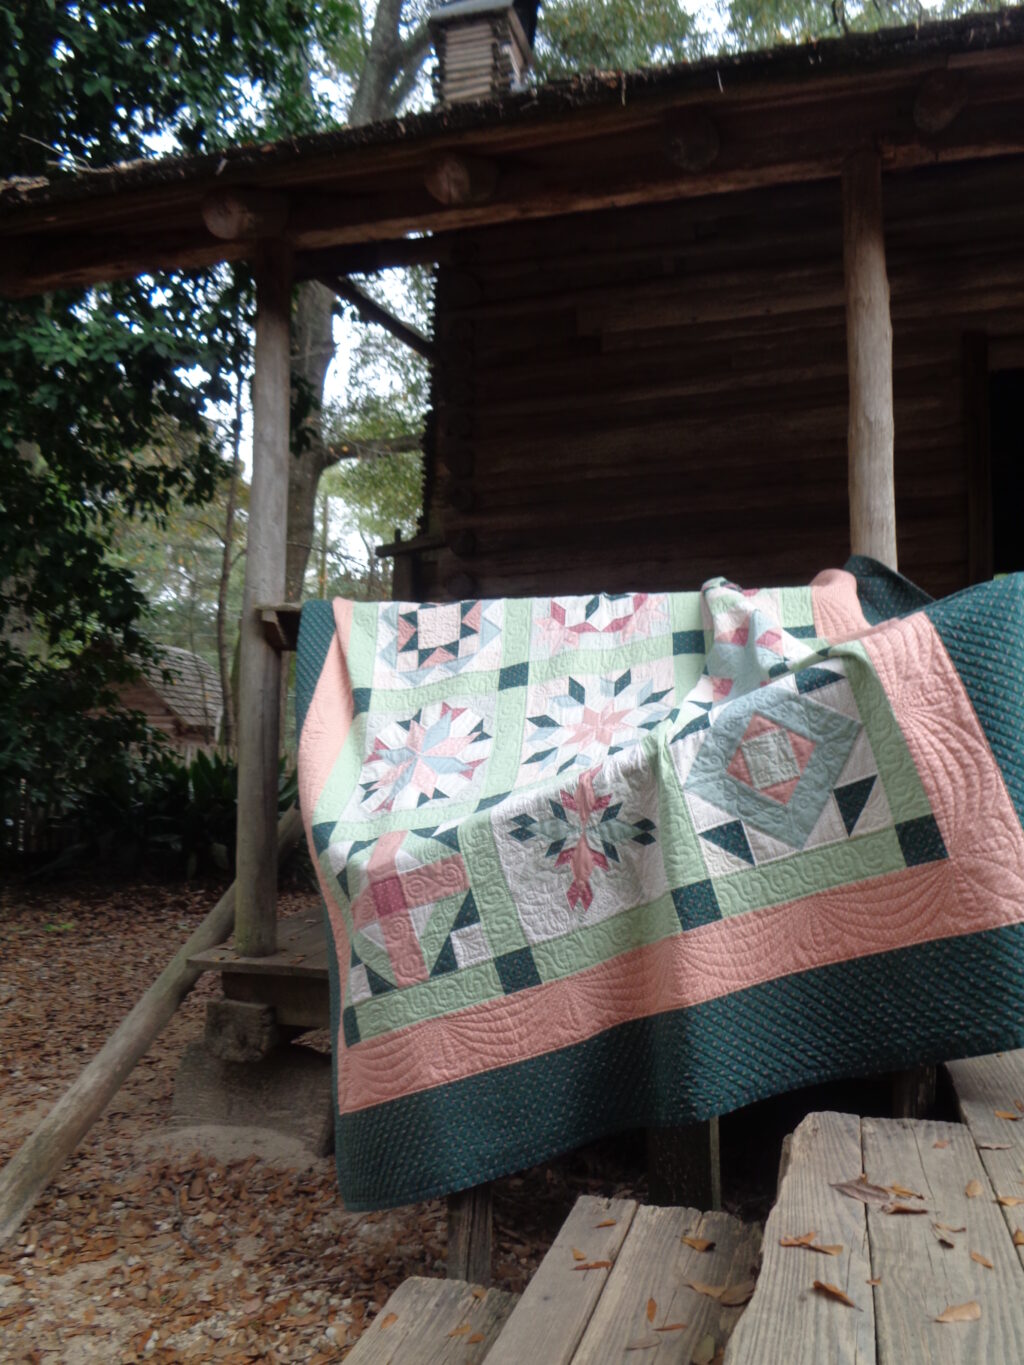 Beginning Quilting Workshop at the Tallahassee Museum